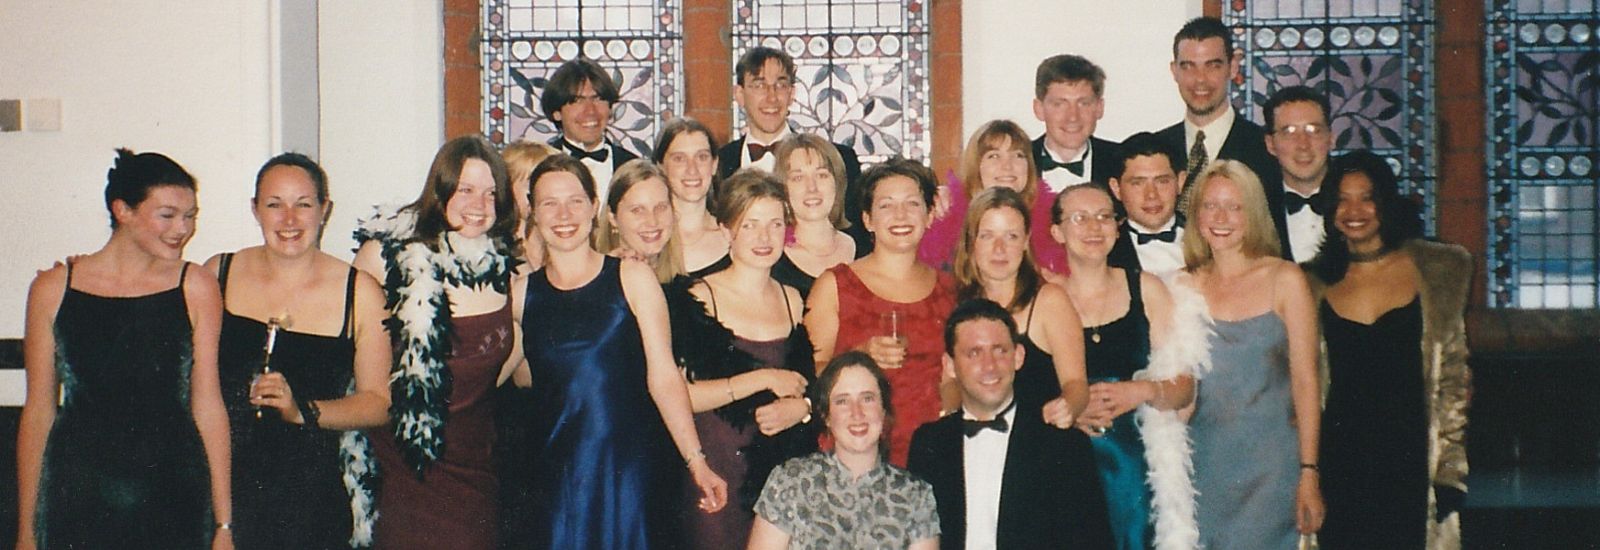 The Reading Foodie group posing for a photo in 1999